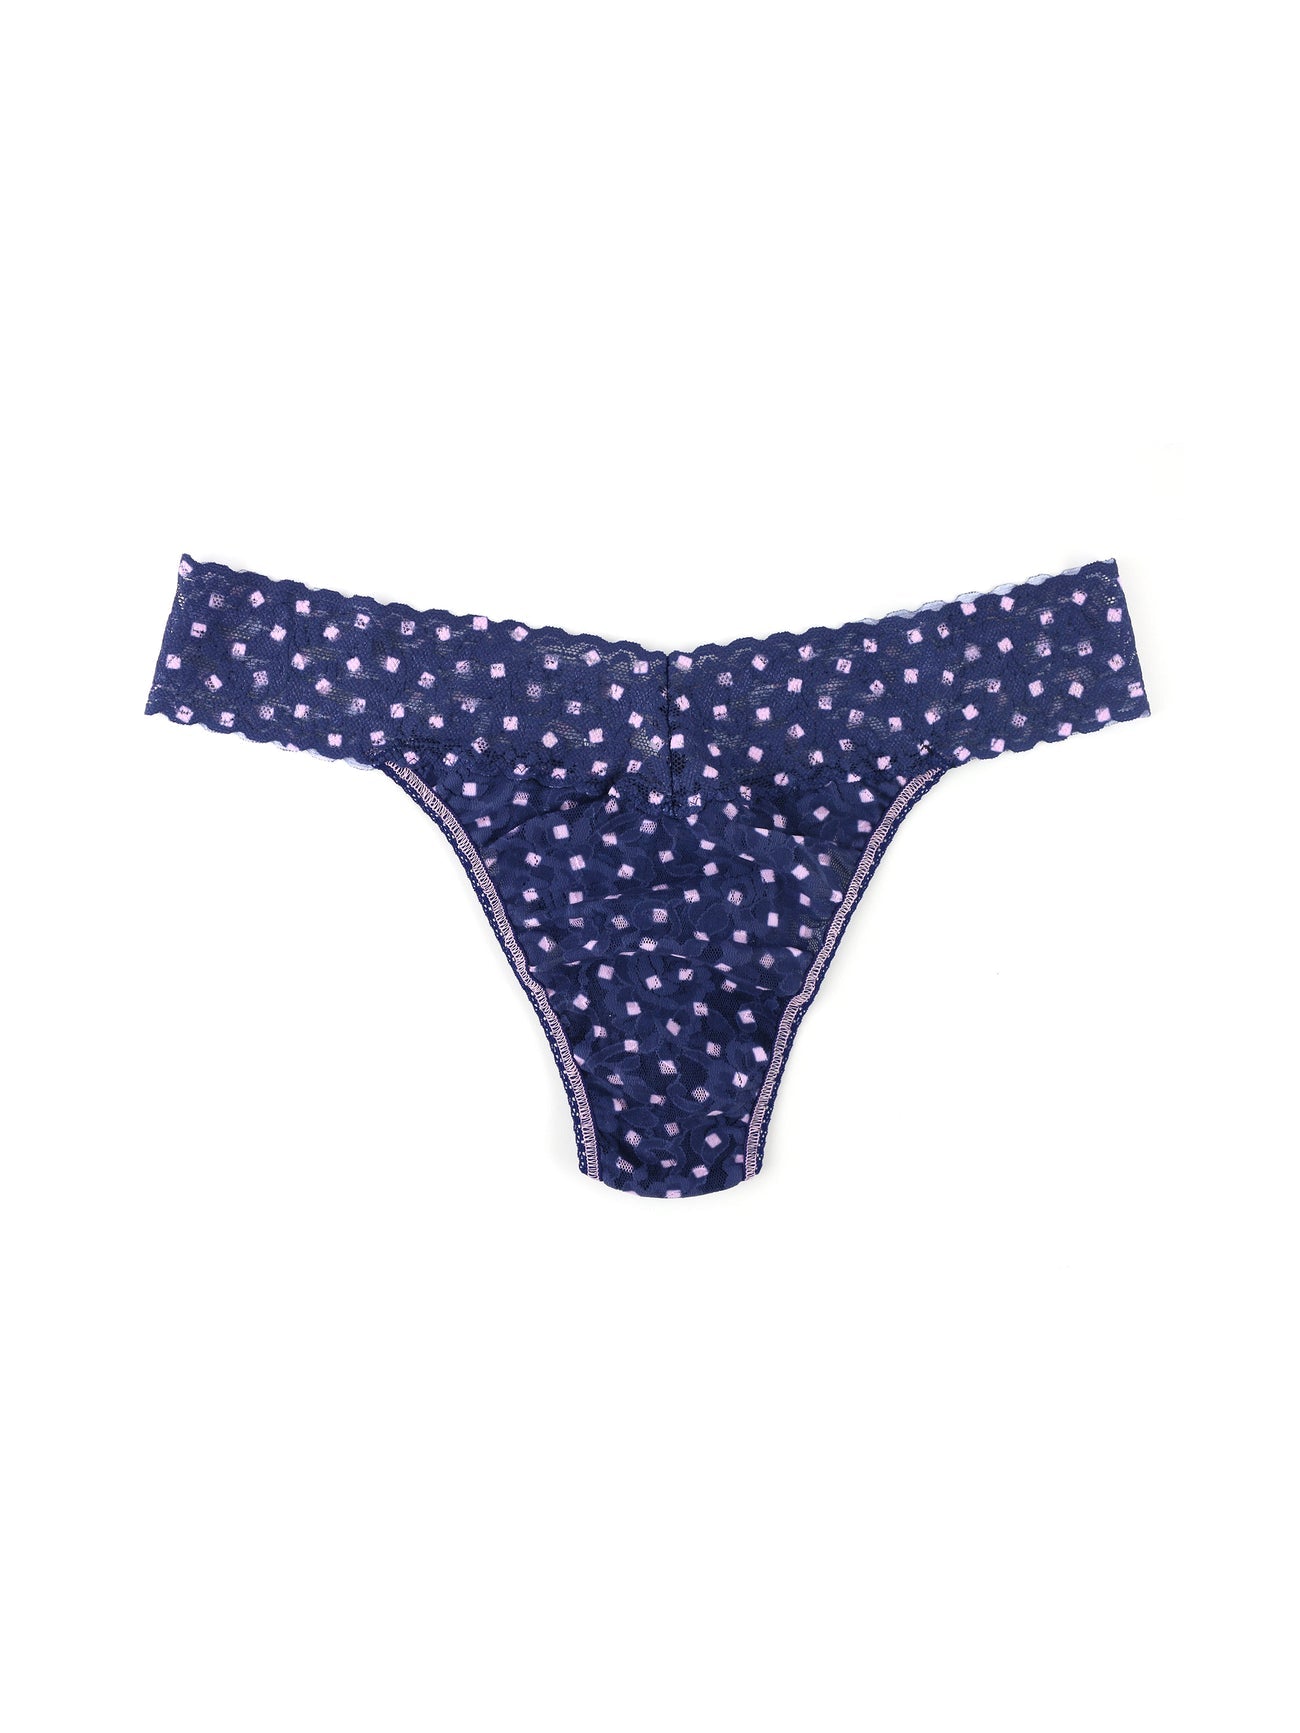 Hanky Panky Square Root Thong - My Filosophy